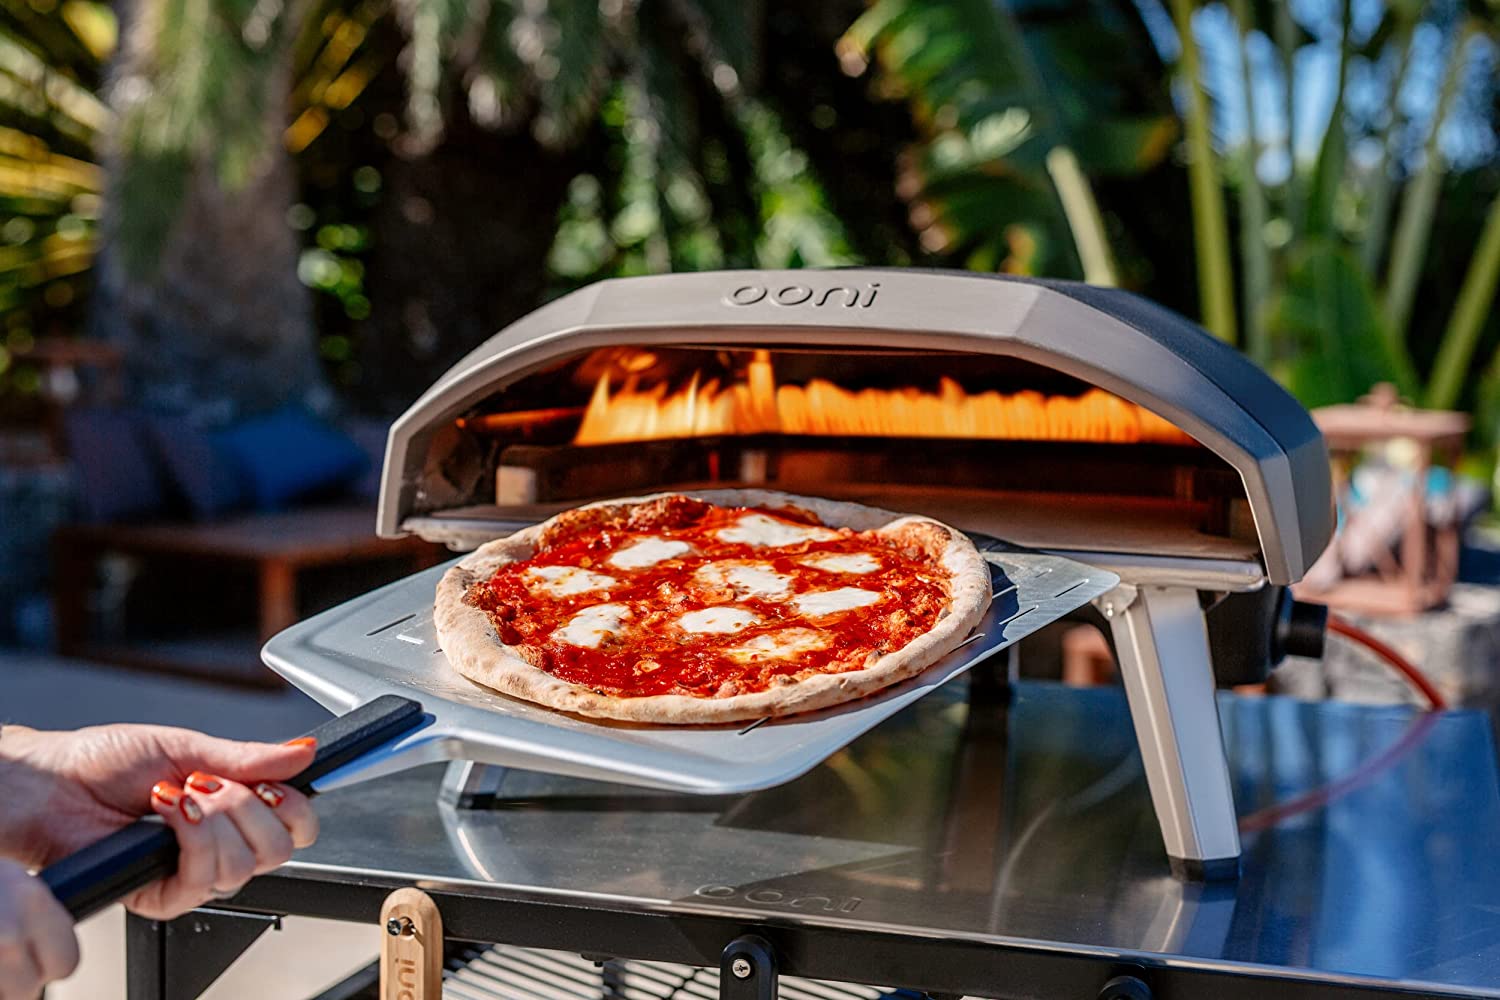 Ooni Koda 16 Gas Powered Pizza Oven shown with Neapolitan Pizza | Image by Ooni